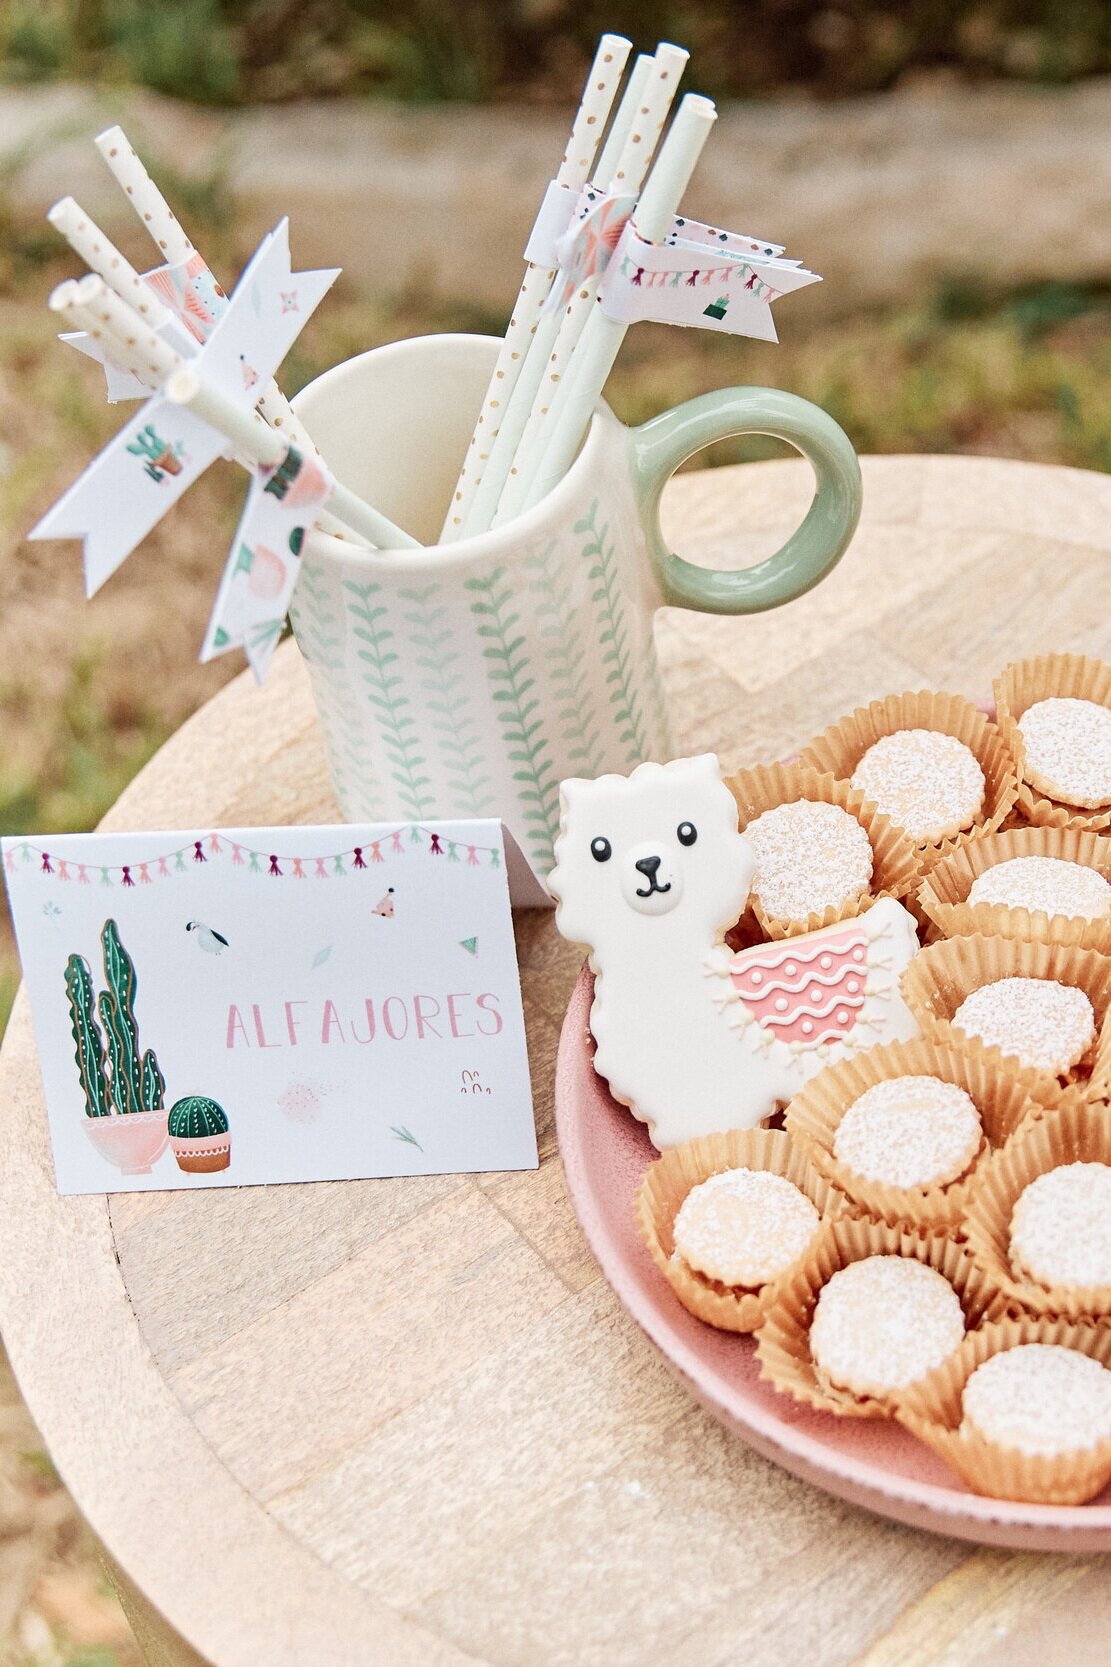 Llama party desserts - get details and more party inspiration now at minteventdesign.com!